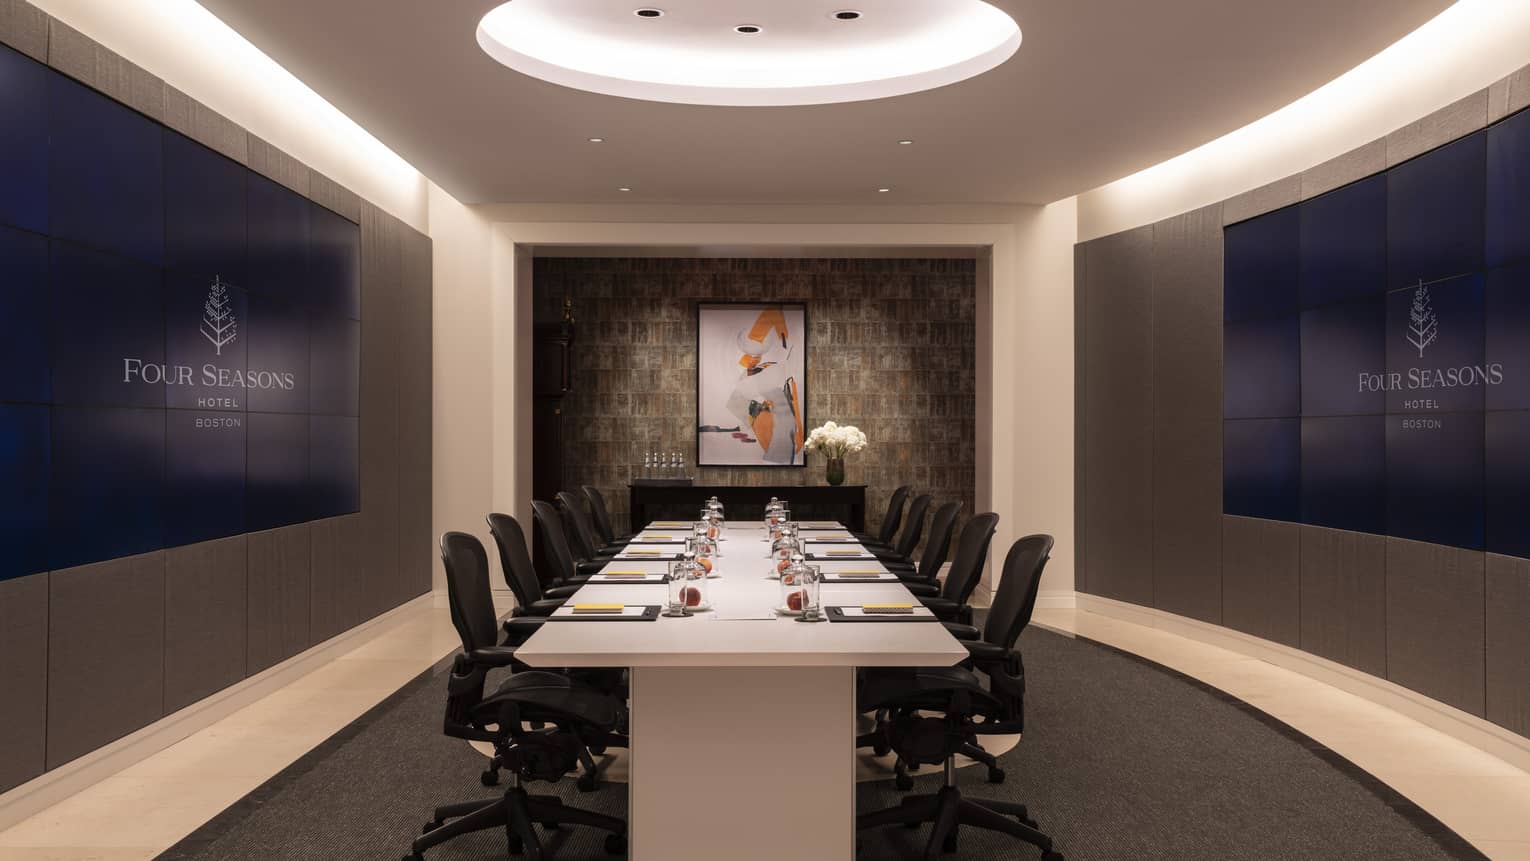 A meeting room with a large white boardroom table surrounded by black chairs with wheels.